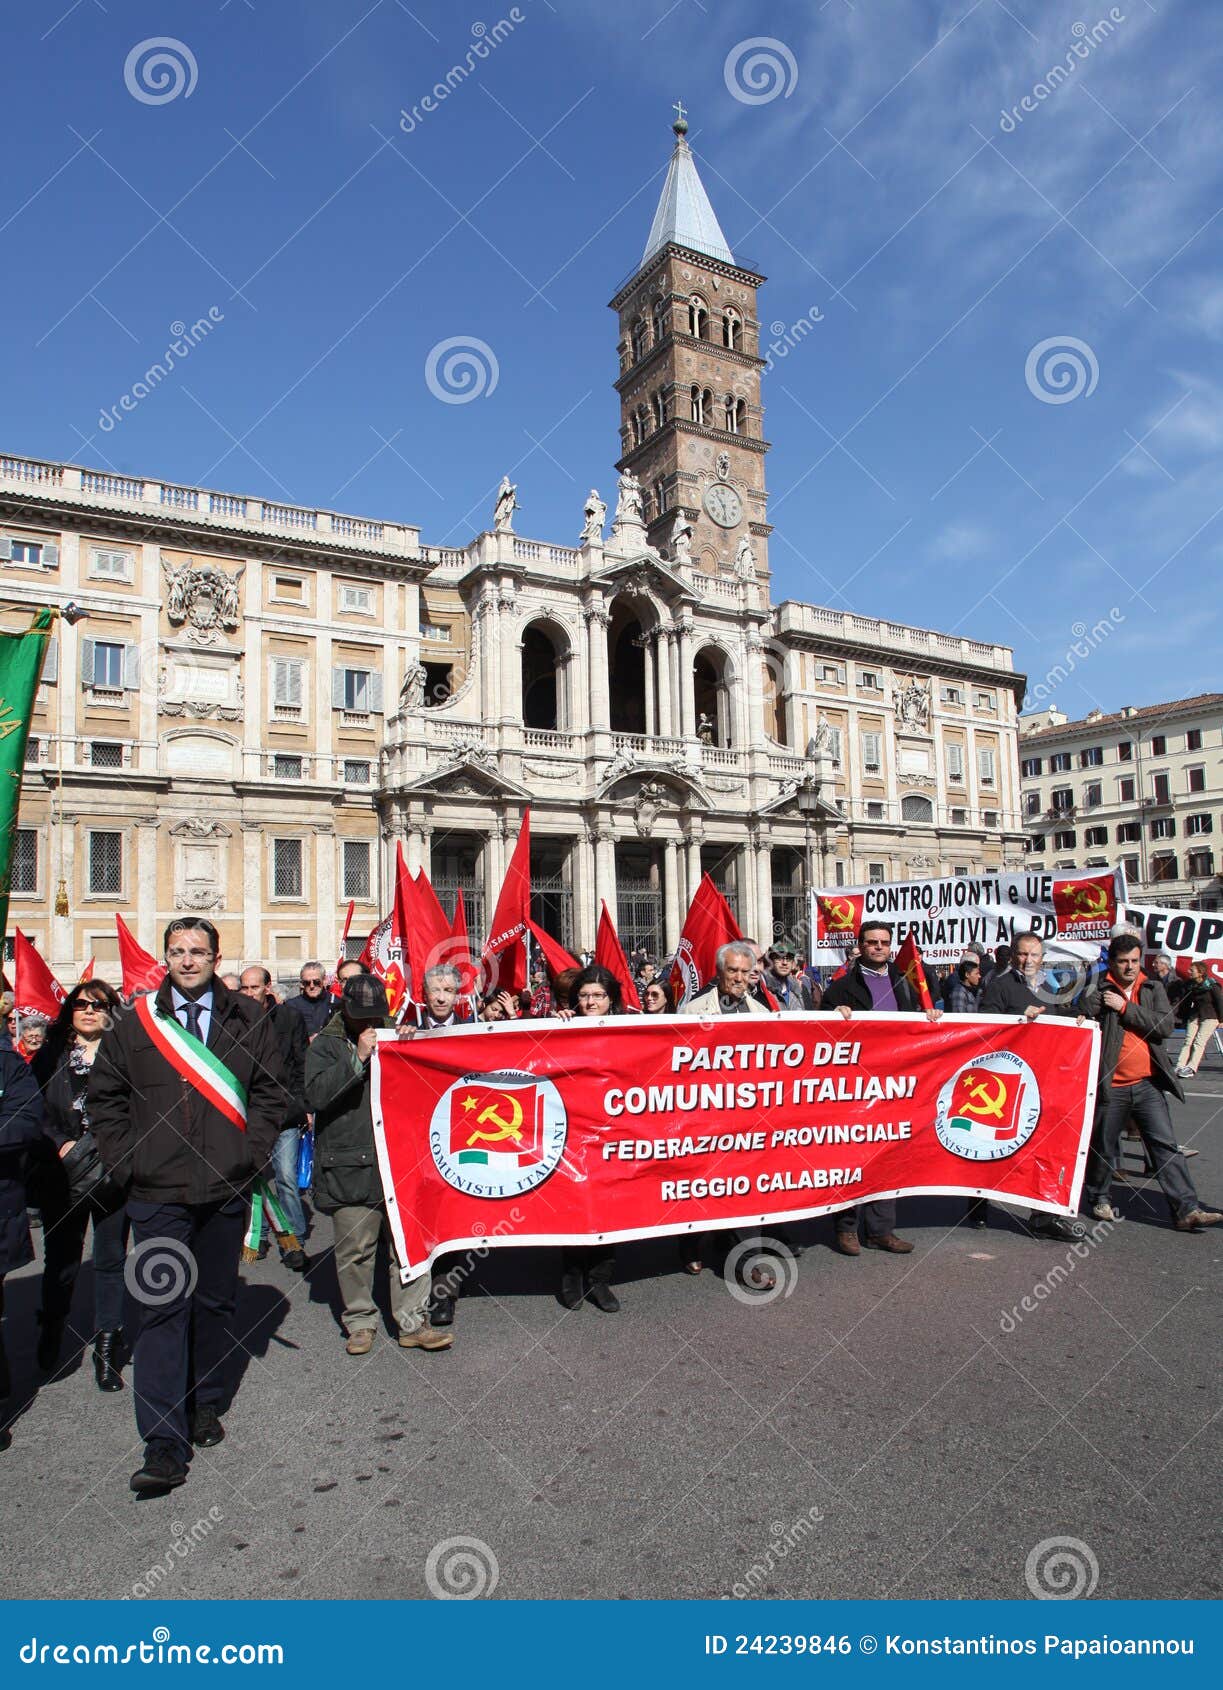 Demonstration Of Italian Communist Party Editorial Photo - Image: 24239846